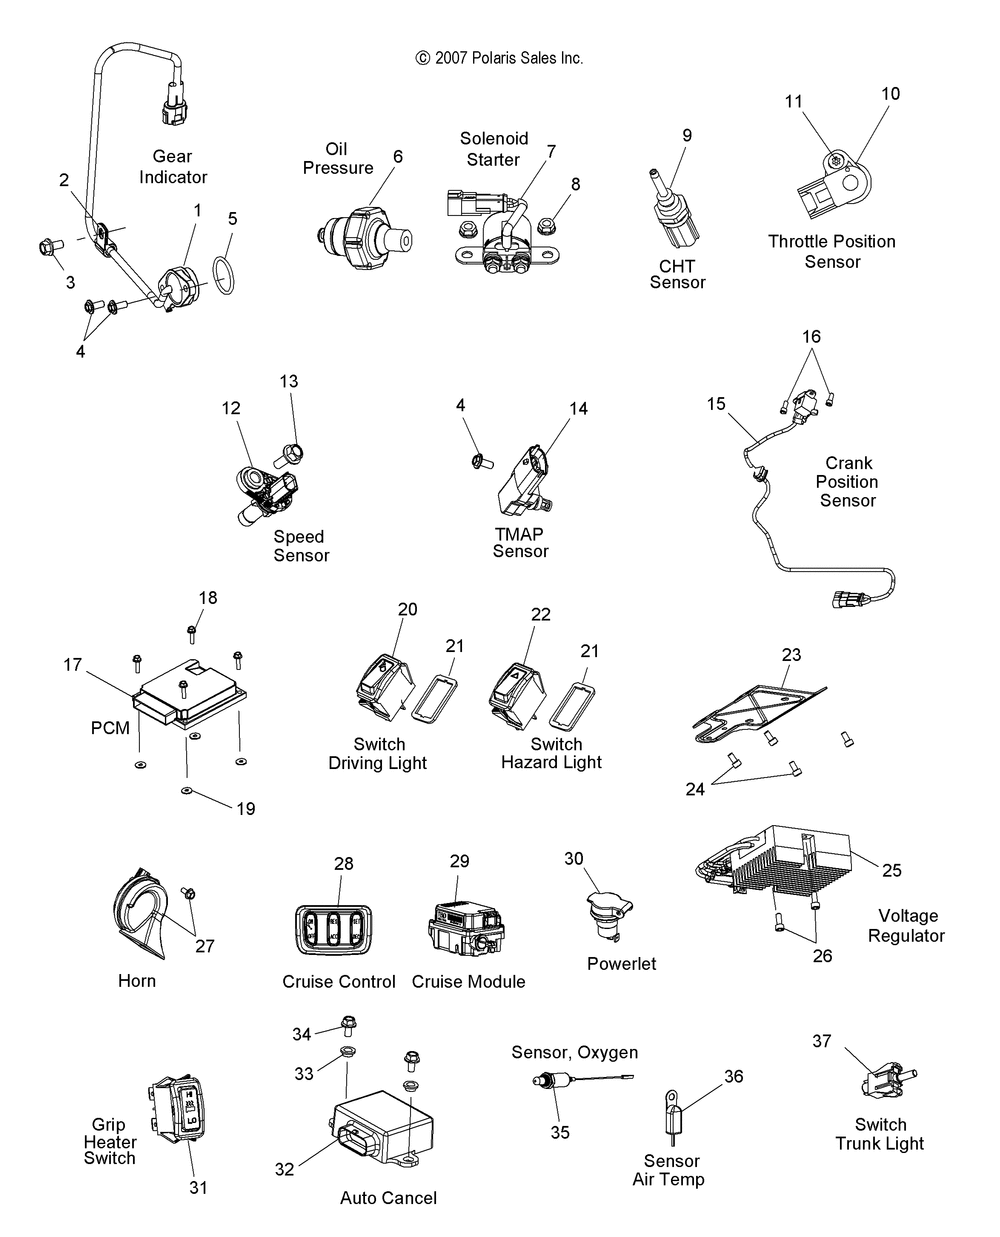 Electrical switches sensors and components - v08sb36_sd36 all options